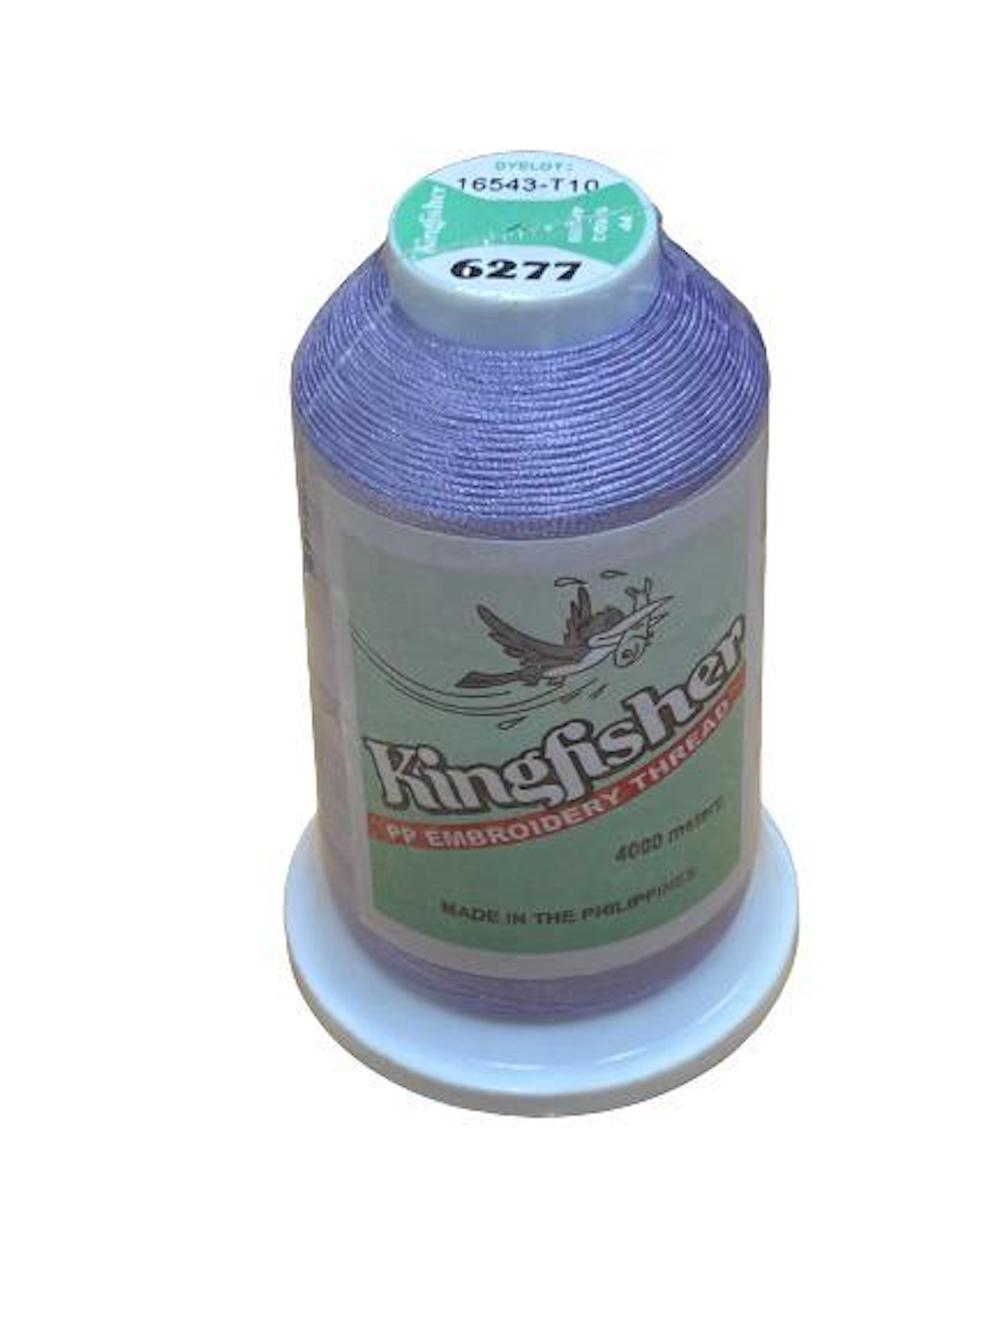 King Fisher Embroidery Thread 4000m 6277 - MY SEWING MALL